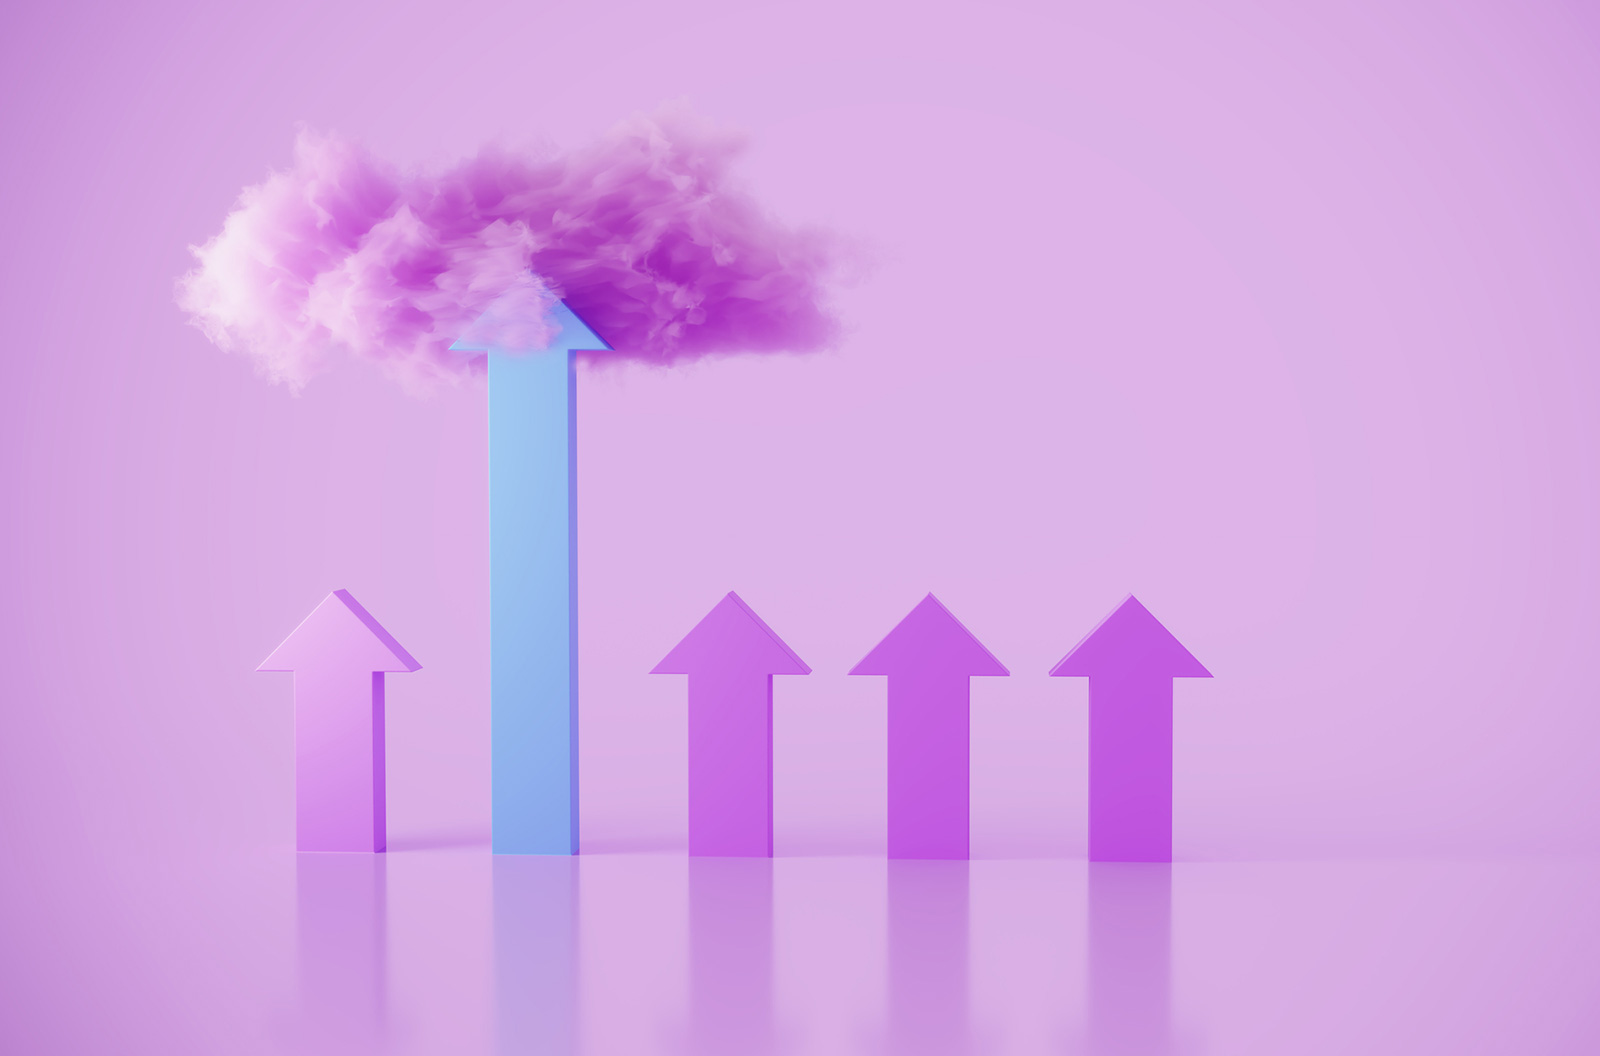 A light purple stock image with four purple arrows and a blue longer one by Eoneren.jpg